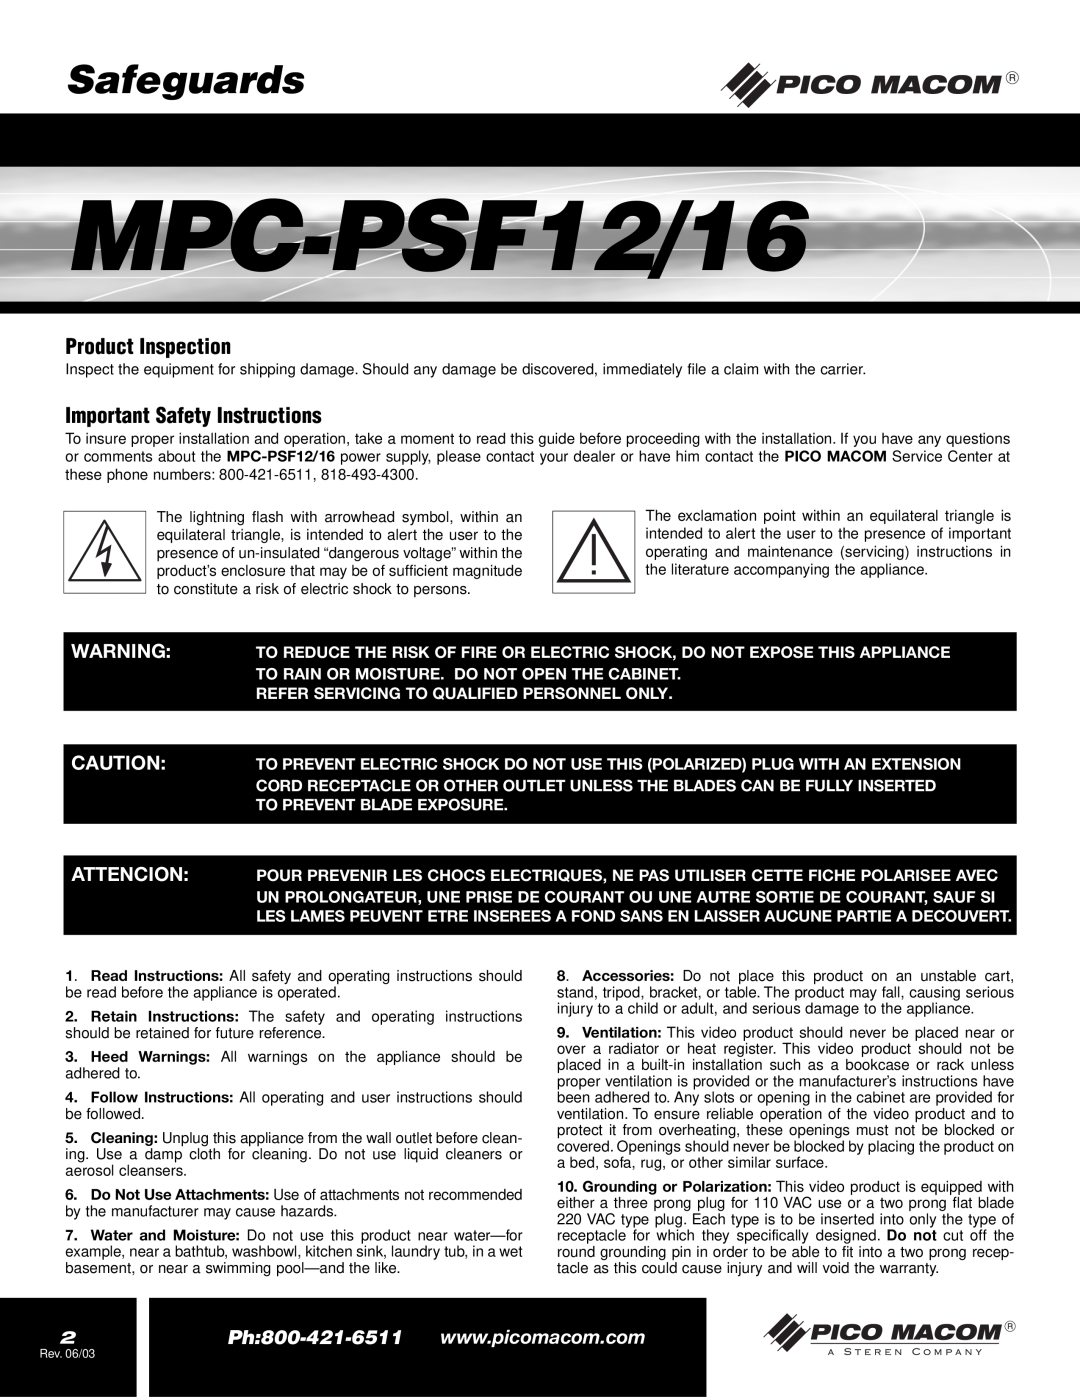 Pico Macom MPC-PSF16 operation manual Safeguards, Product Inspection, Important Safety Instructions, MPC-PSF12/16 